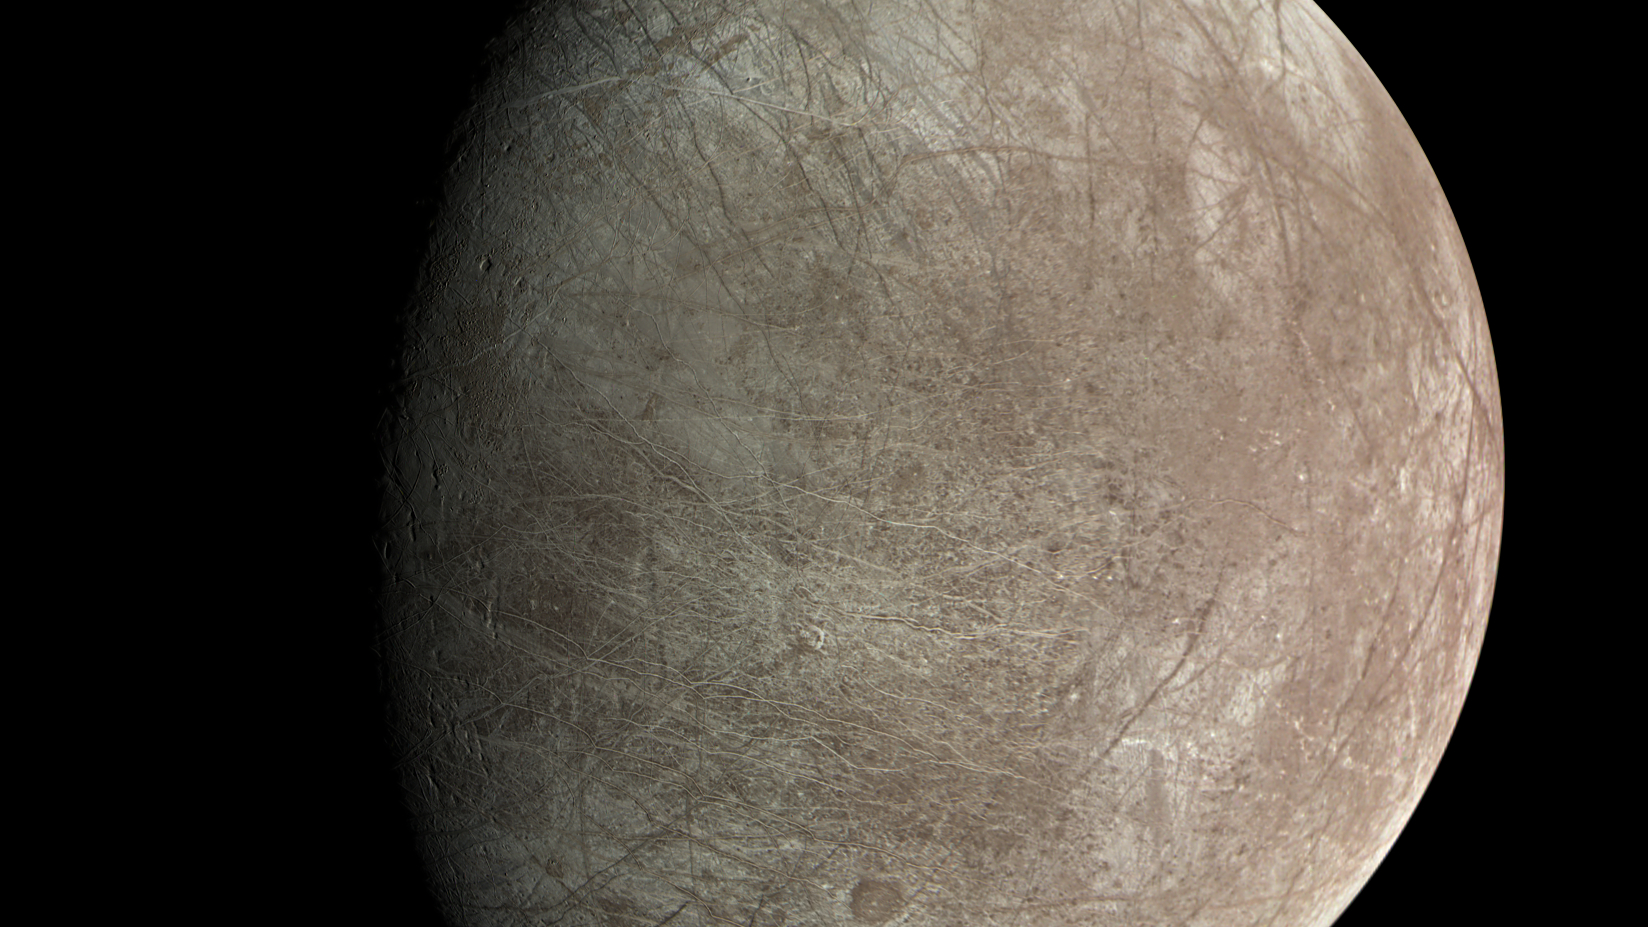 NASA’s Juno probe captures fascinating high-resolution images of Jupiter’s icy moon Europa Space